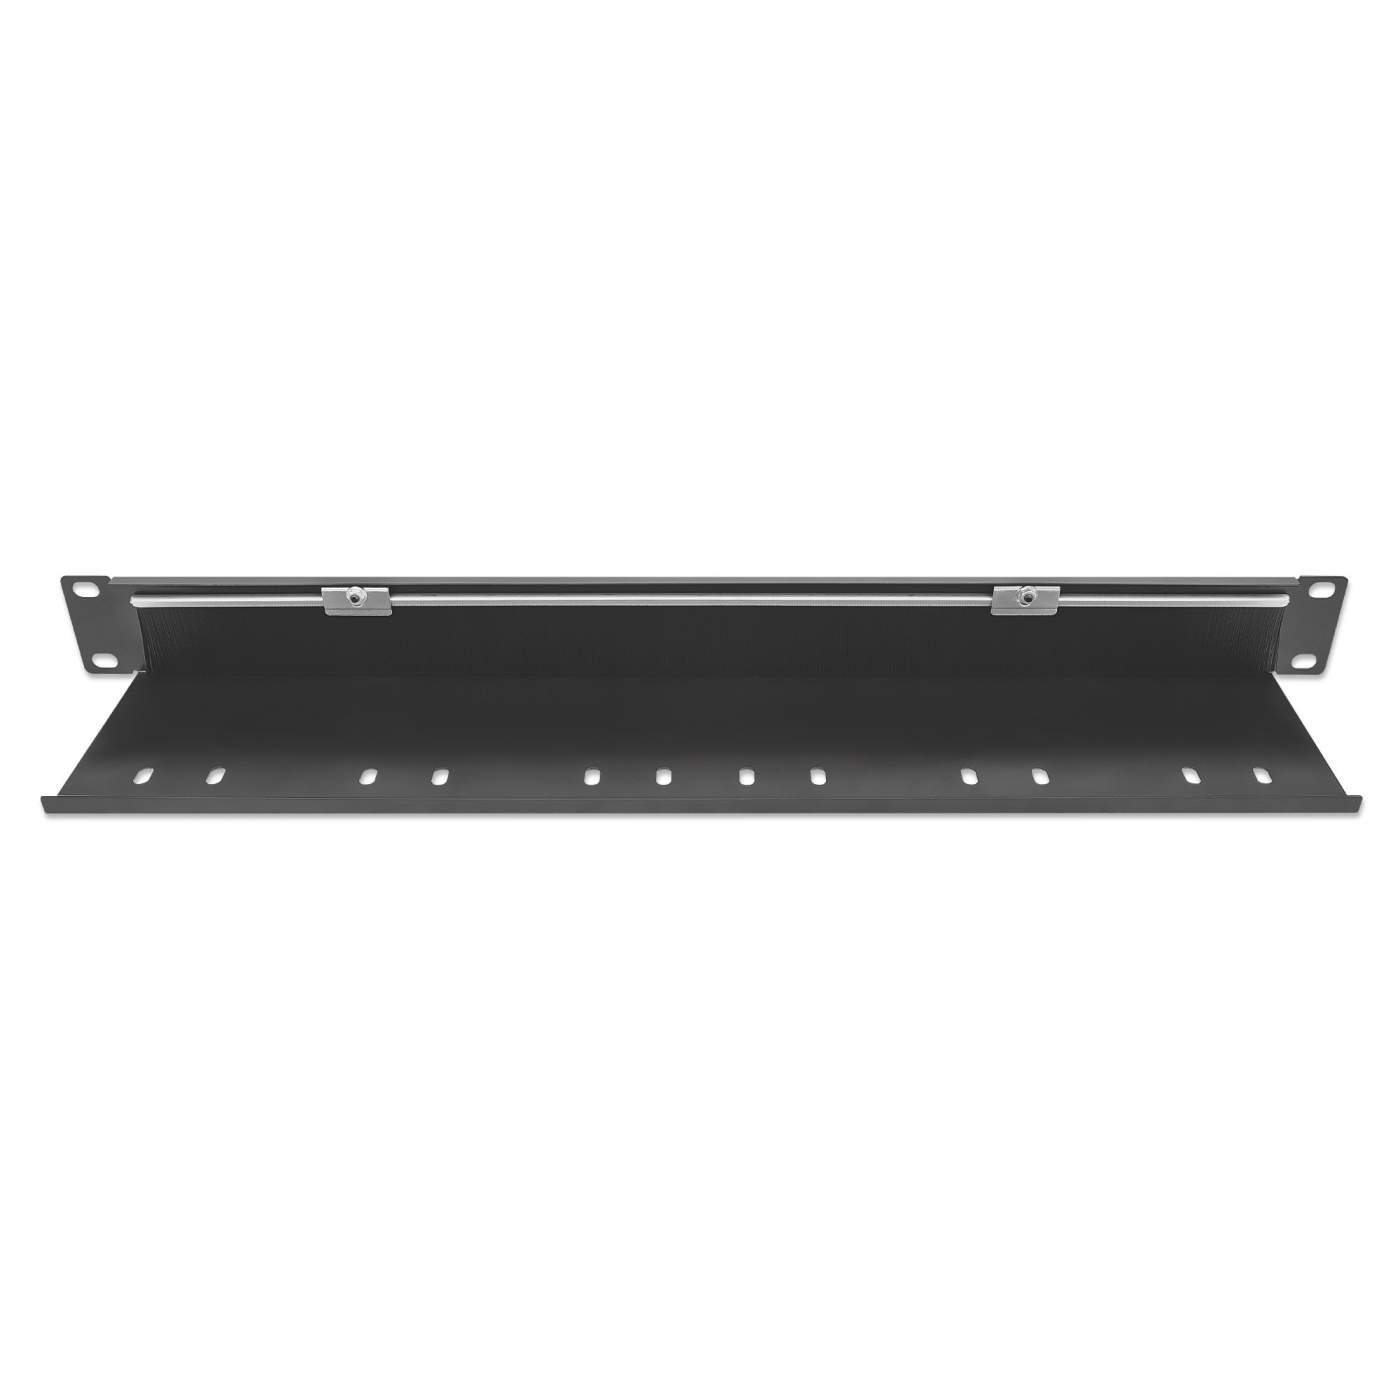 19" Cable Entry Panel with Cable Tray 2-Pack Image 4